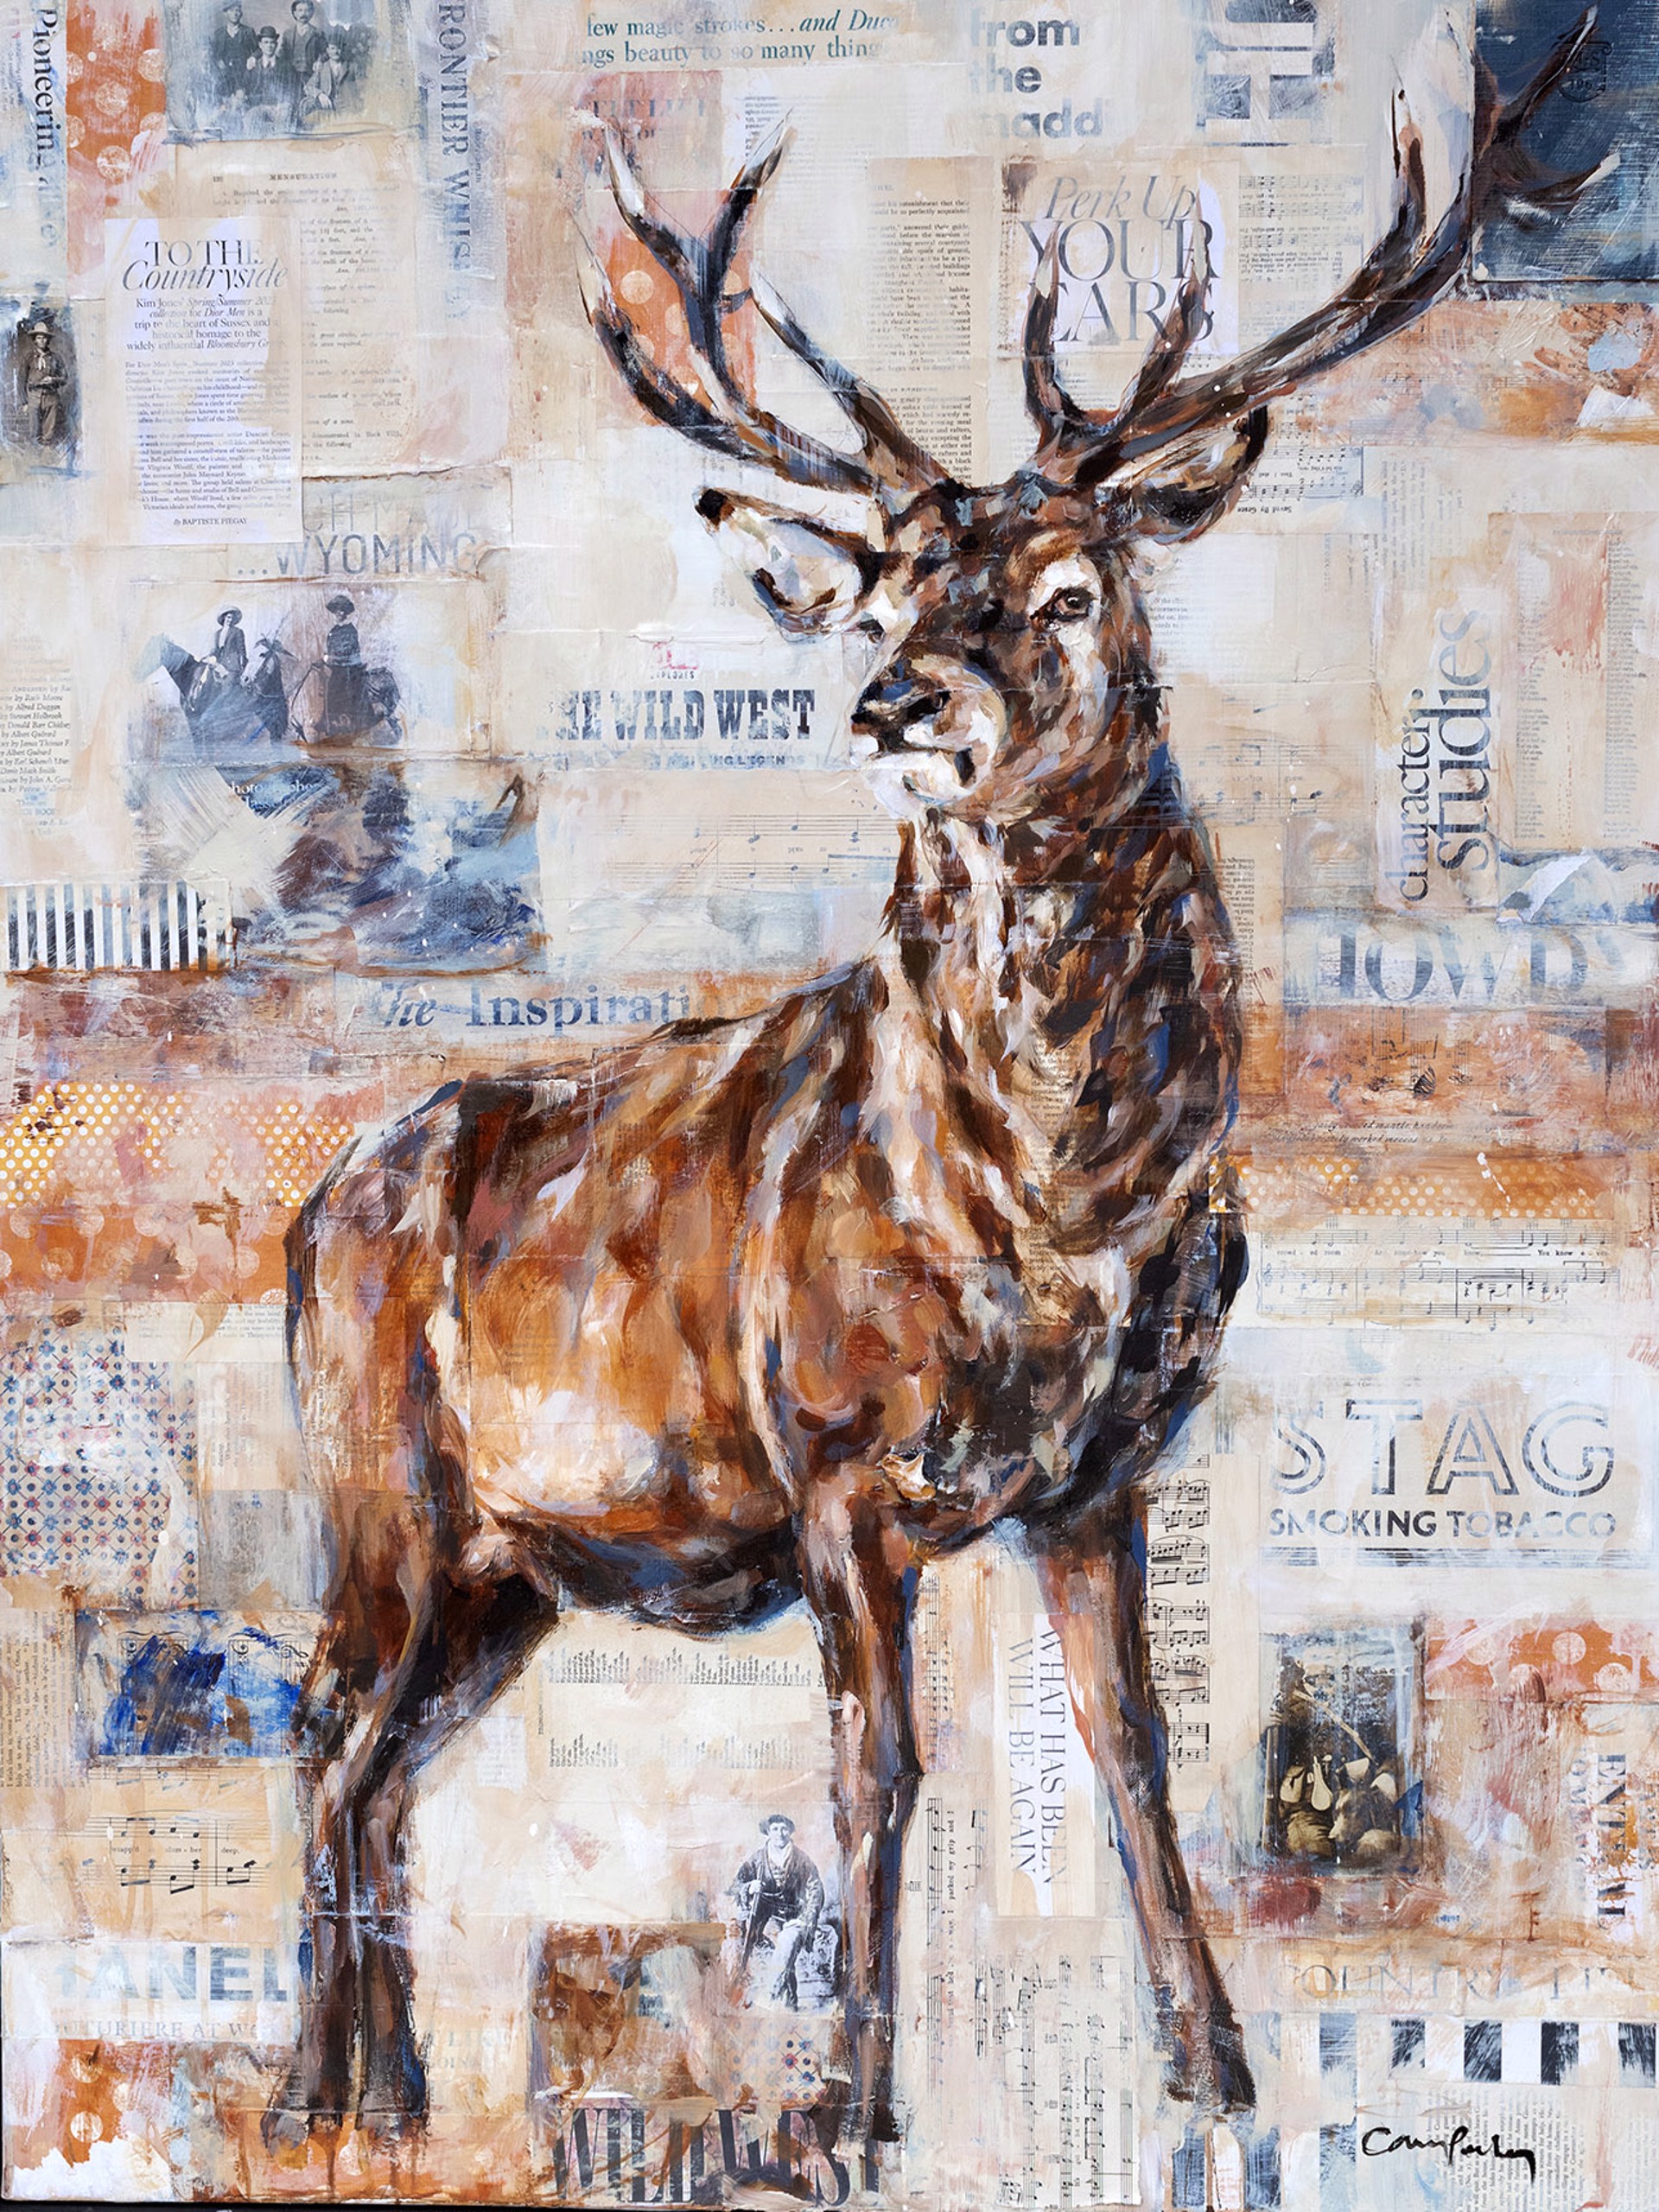 Original Mixed Media Painting By Carrie Penley Featuring A Stag With Vintage Collage Details